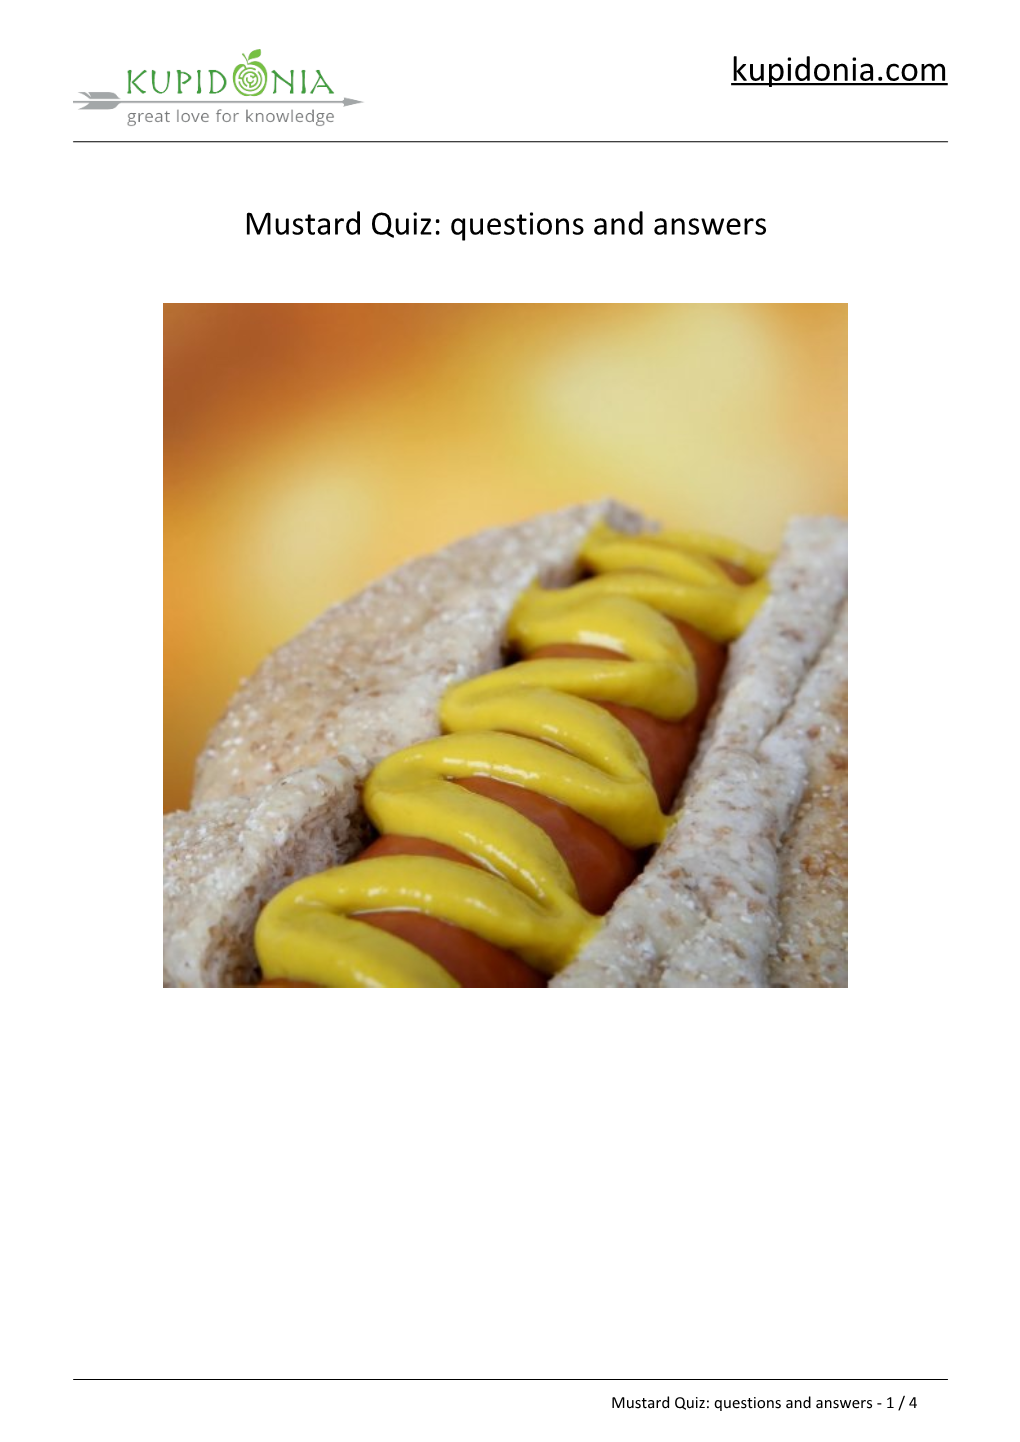 Mustard Quiz: Questions and Answers